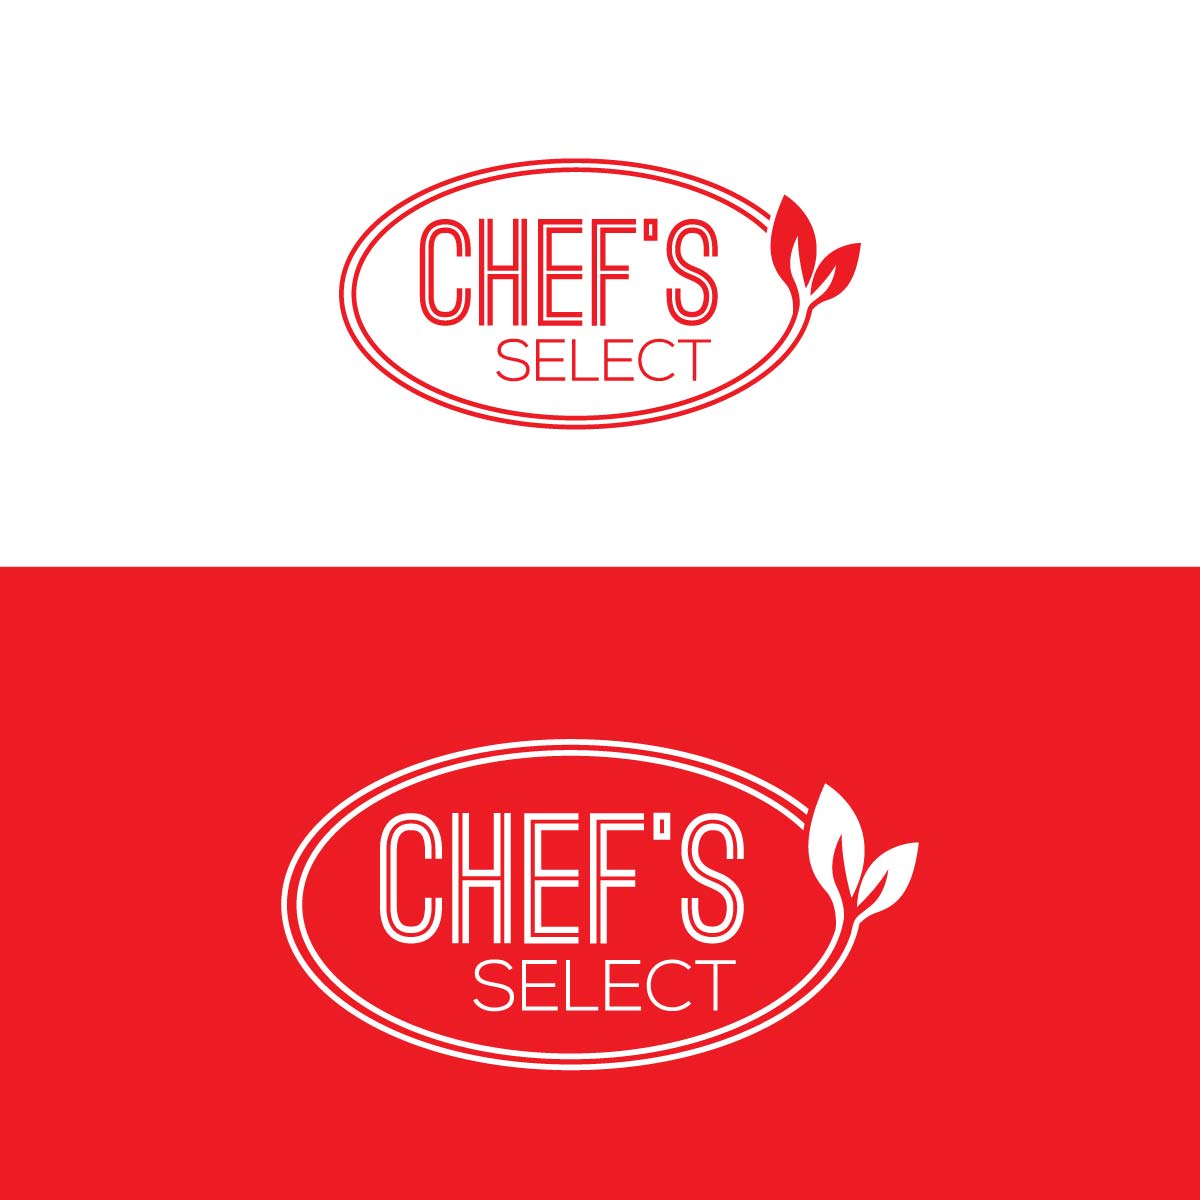 TEXT BASED LOGO DESIGNS FOR chef select